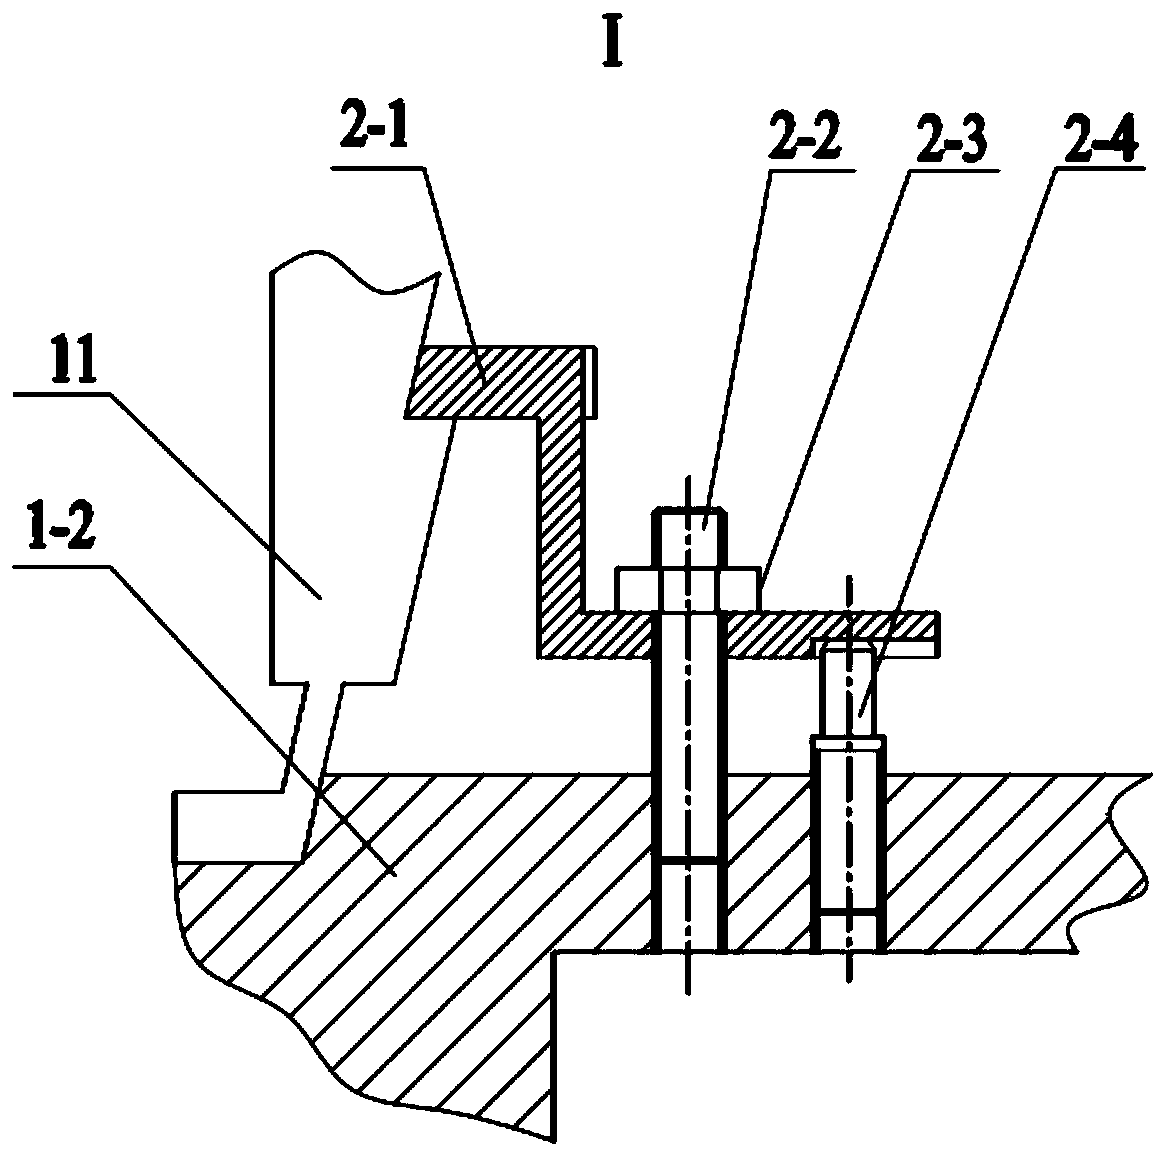 Synchronous telescopic adaptive multi-point support fixture for processing of annular thin-wall workpieces